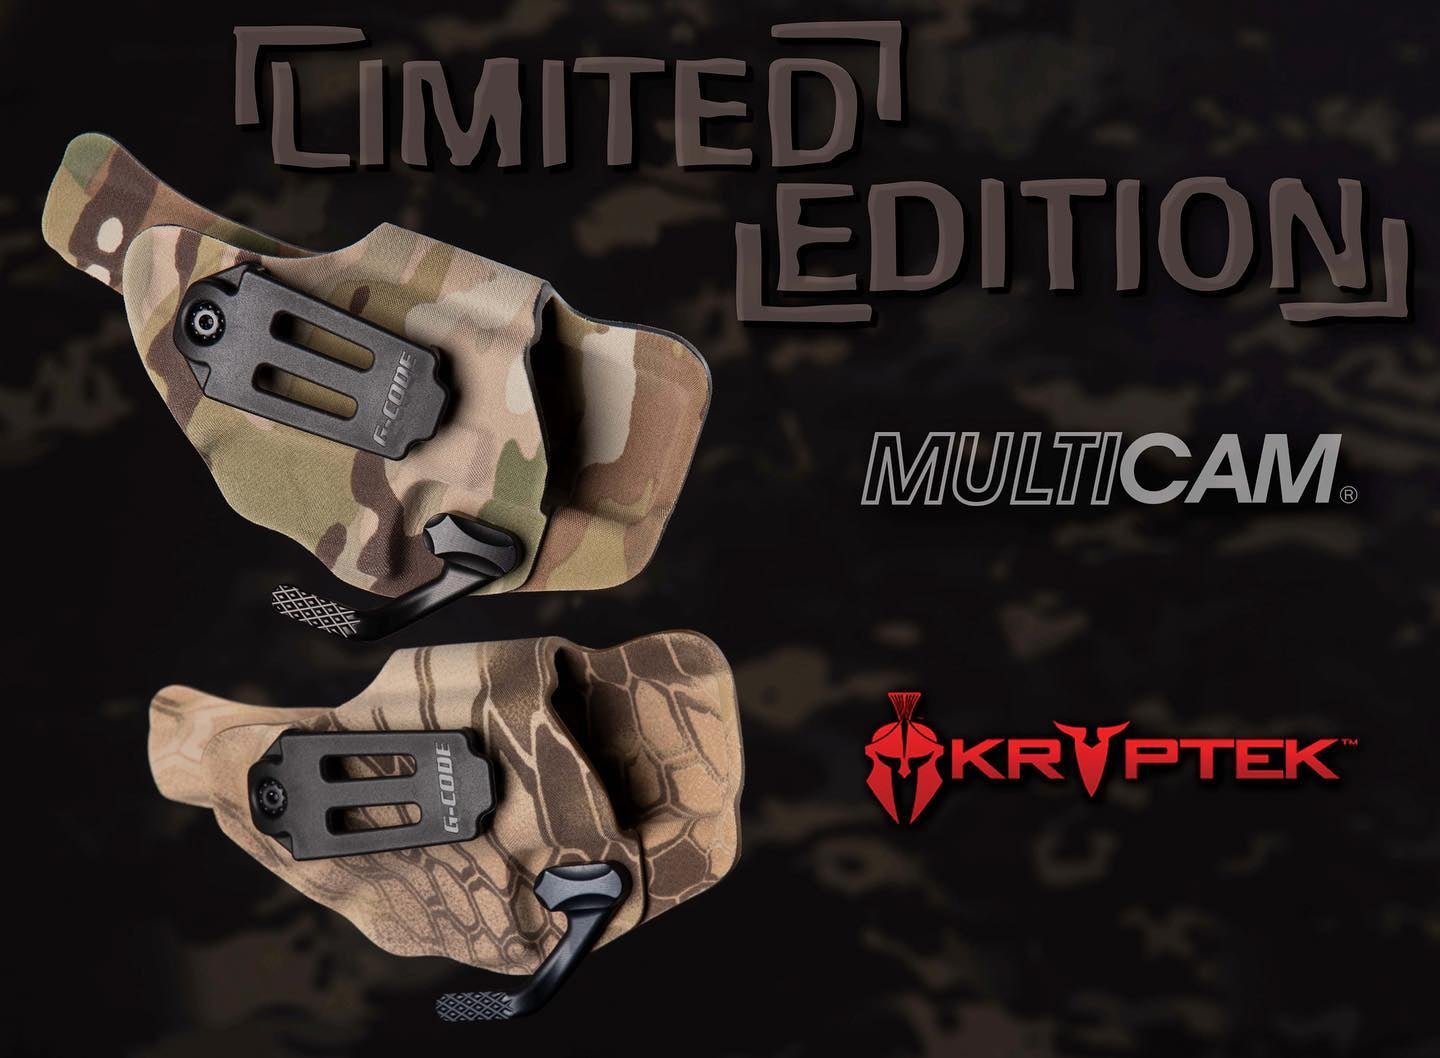 If you prefer a little camo flair on your carry holster, for a limited time you can get a Stealth model in Multicam or Kryptek.